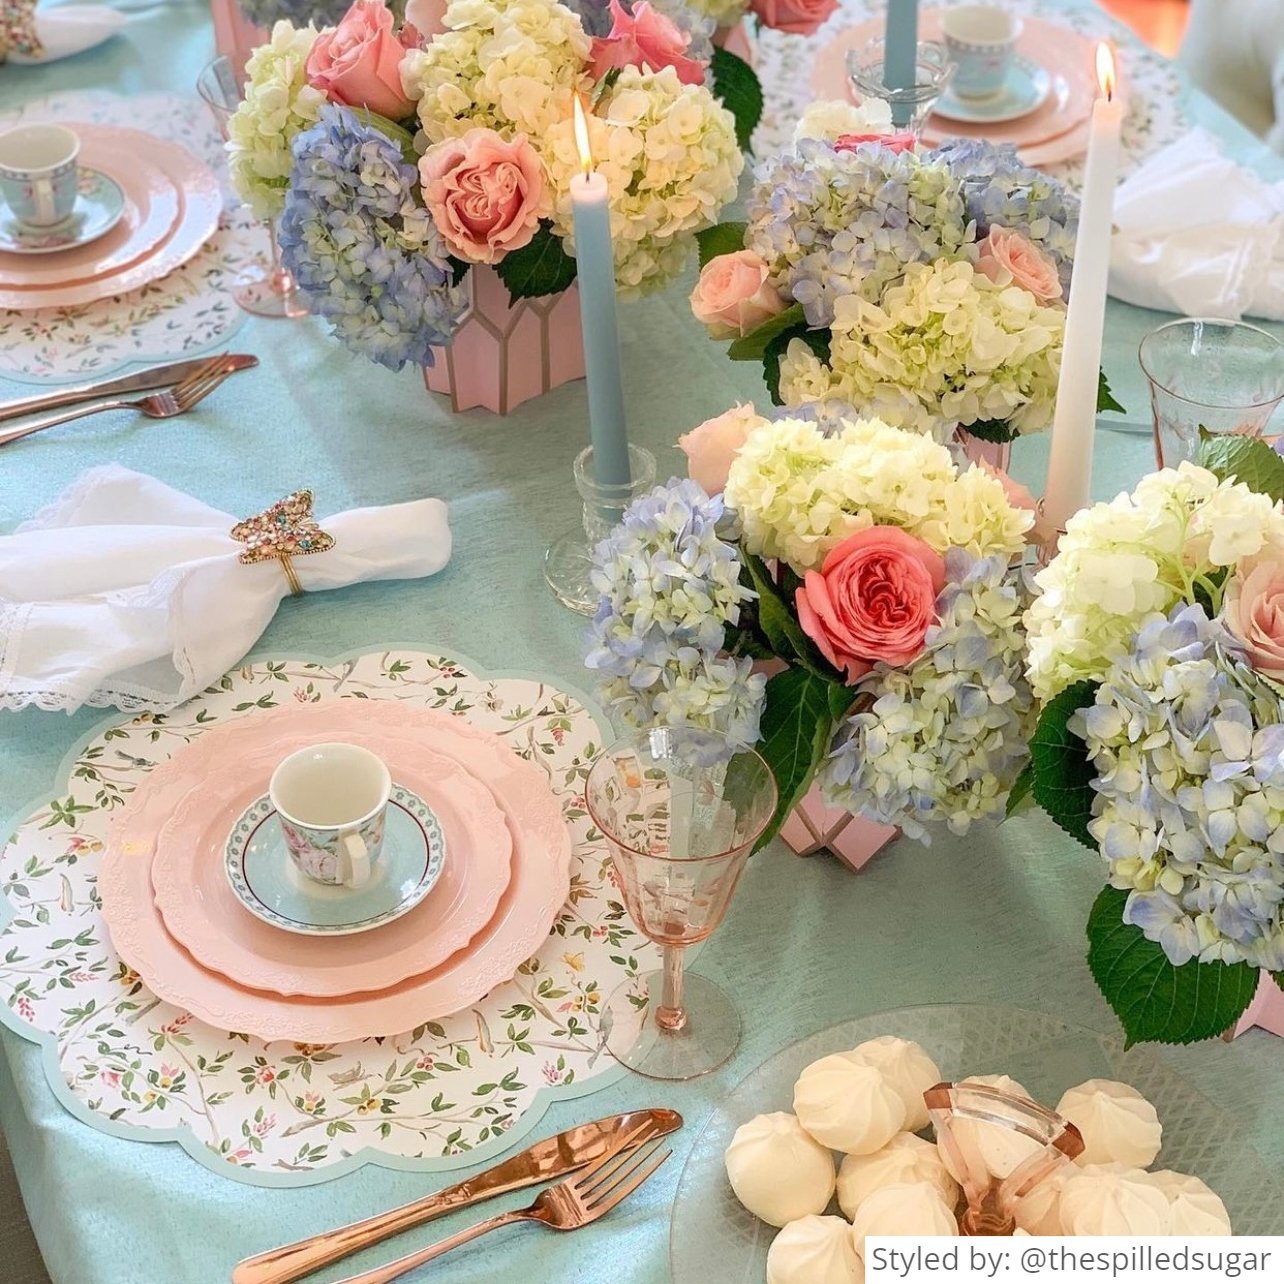 Tea party table setting with white and blue chinoiserie round scalloped paper placemats layered with pink plates and a floral teacup on a blue tablecloth with pink vases and pink, red and blue spring flowers